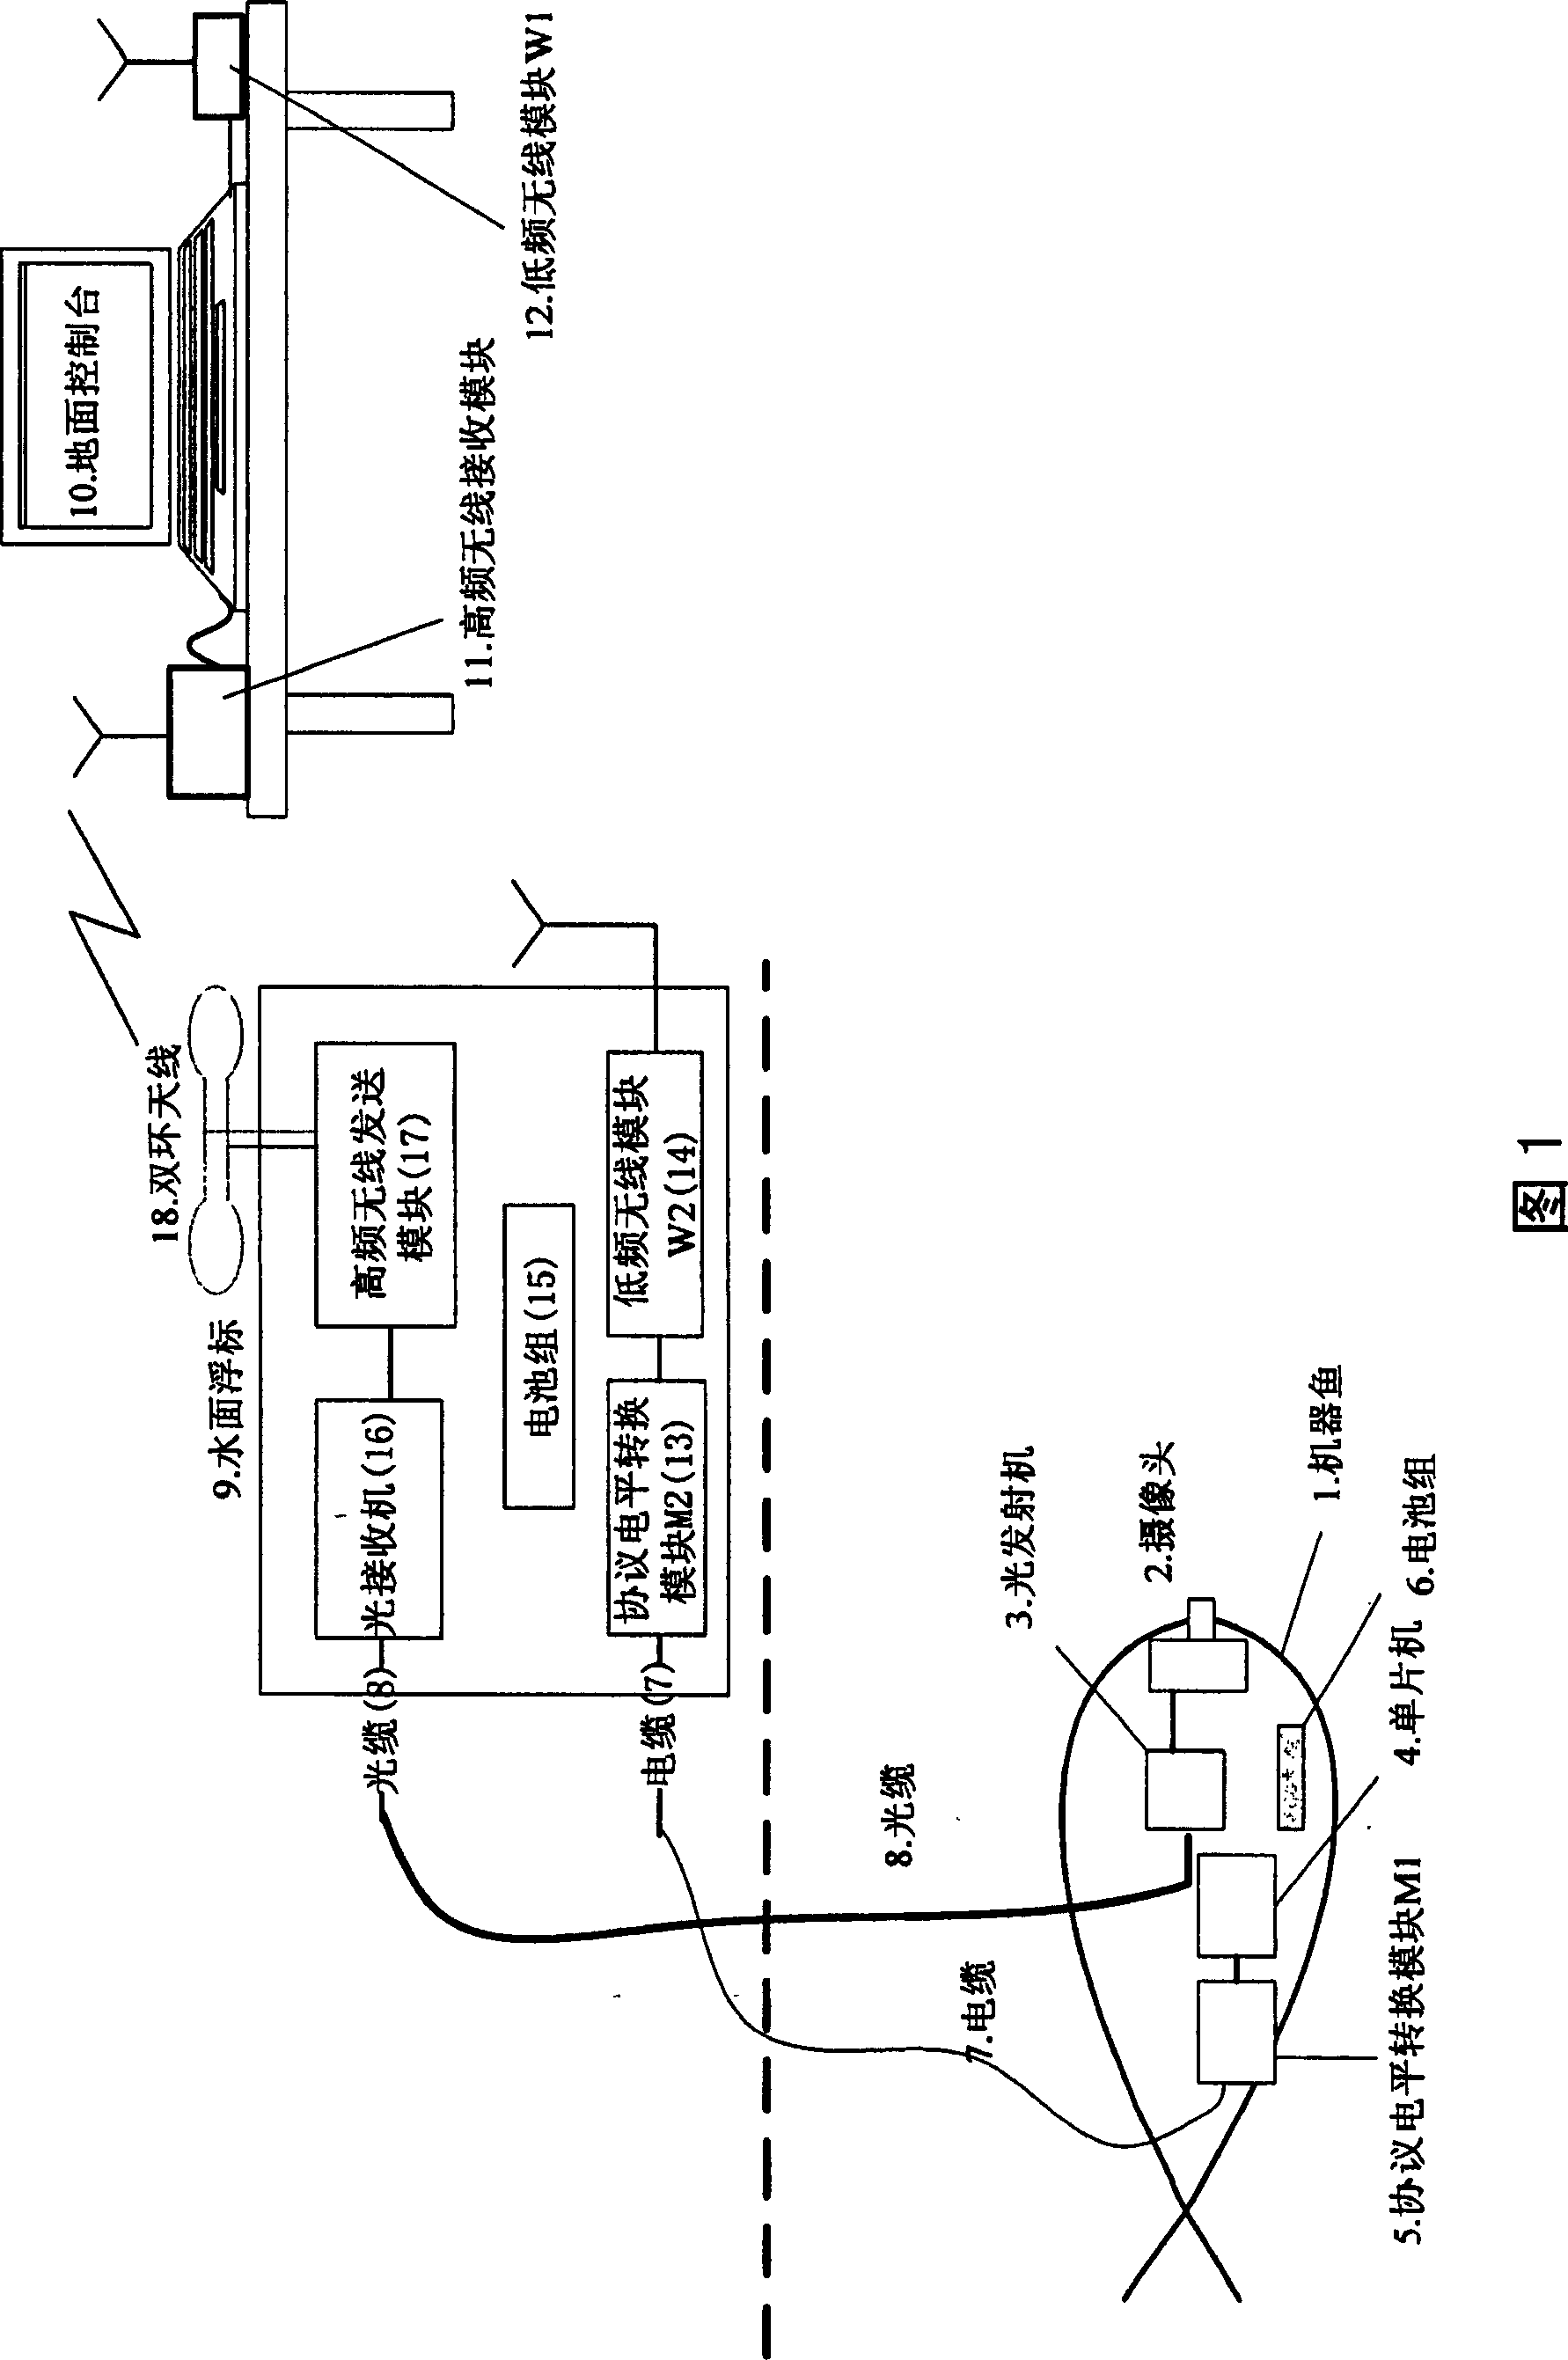 Water surface information relay system used for bionic machine fish